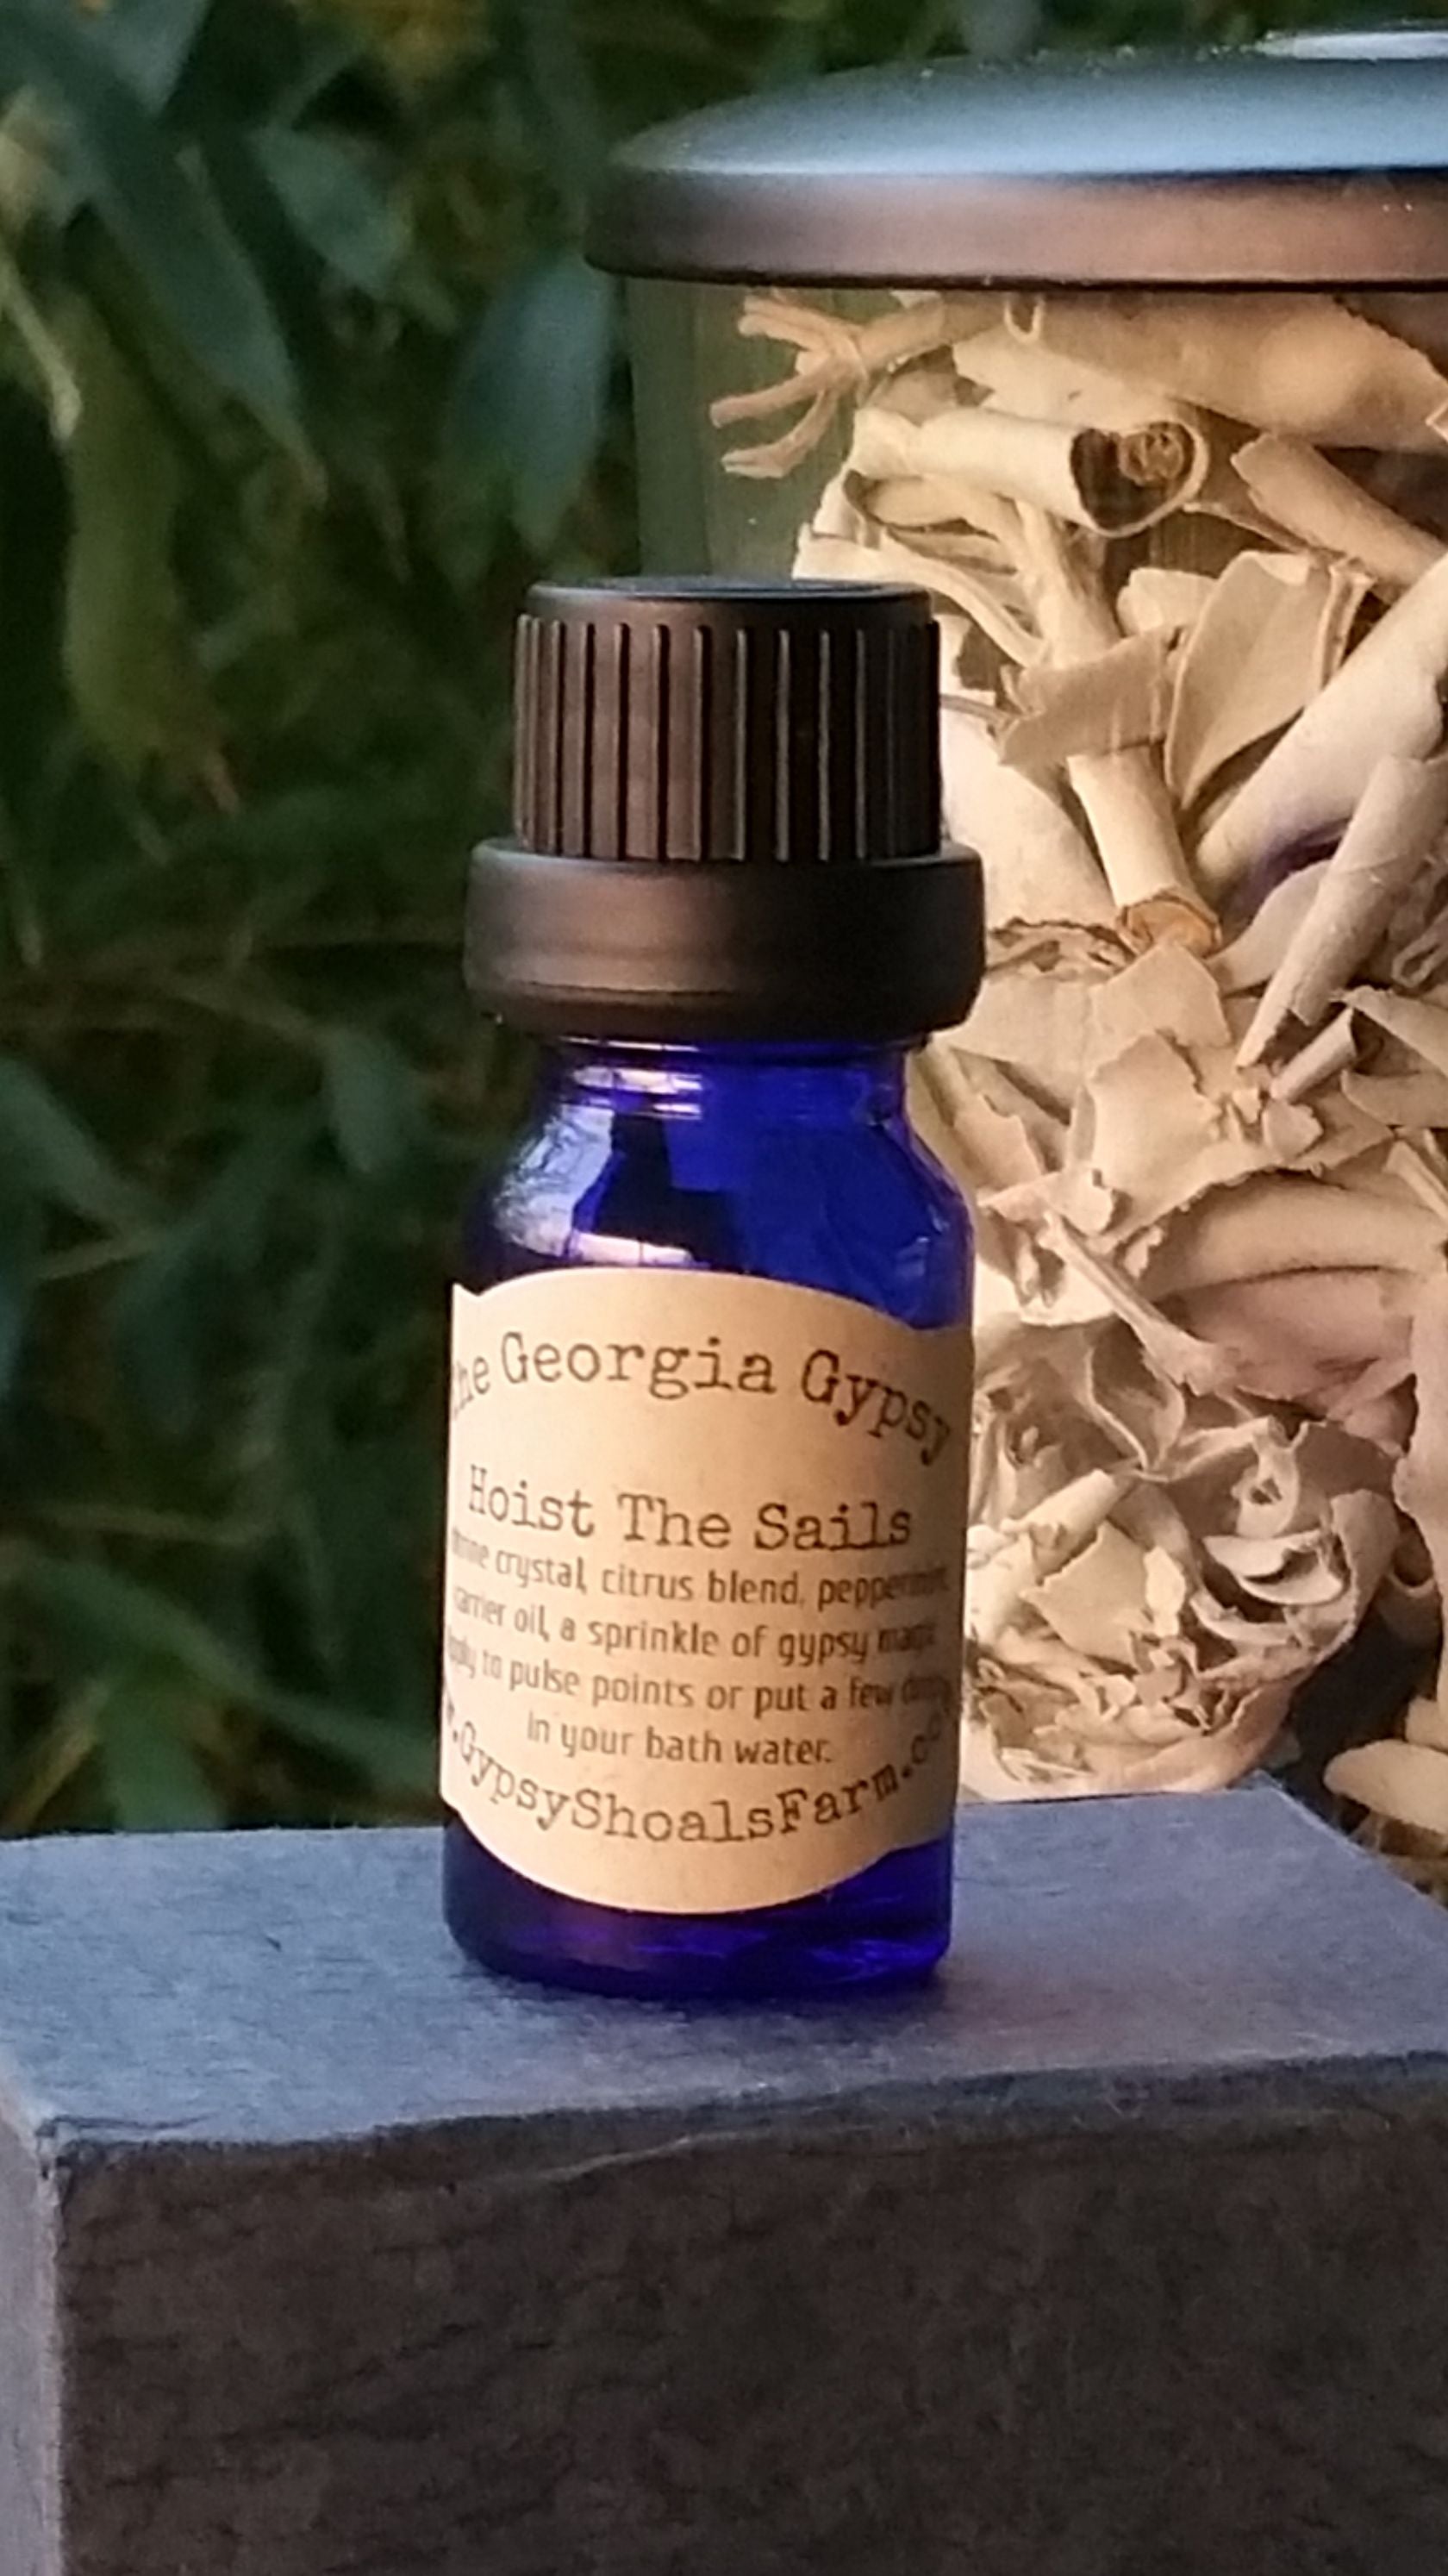 Hoist The Sails georgia gypsy crystal infused energy reiki charged calming therapeutic essential oils magick cameo